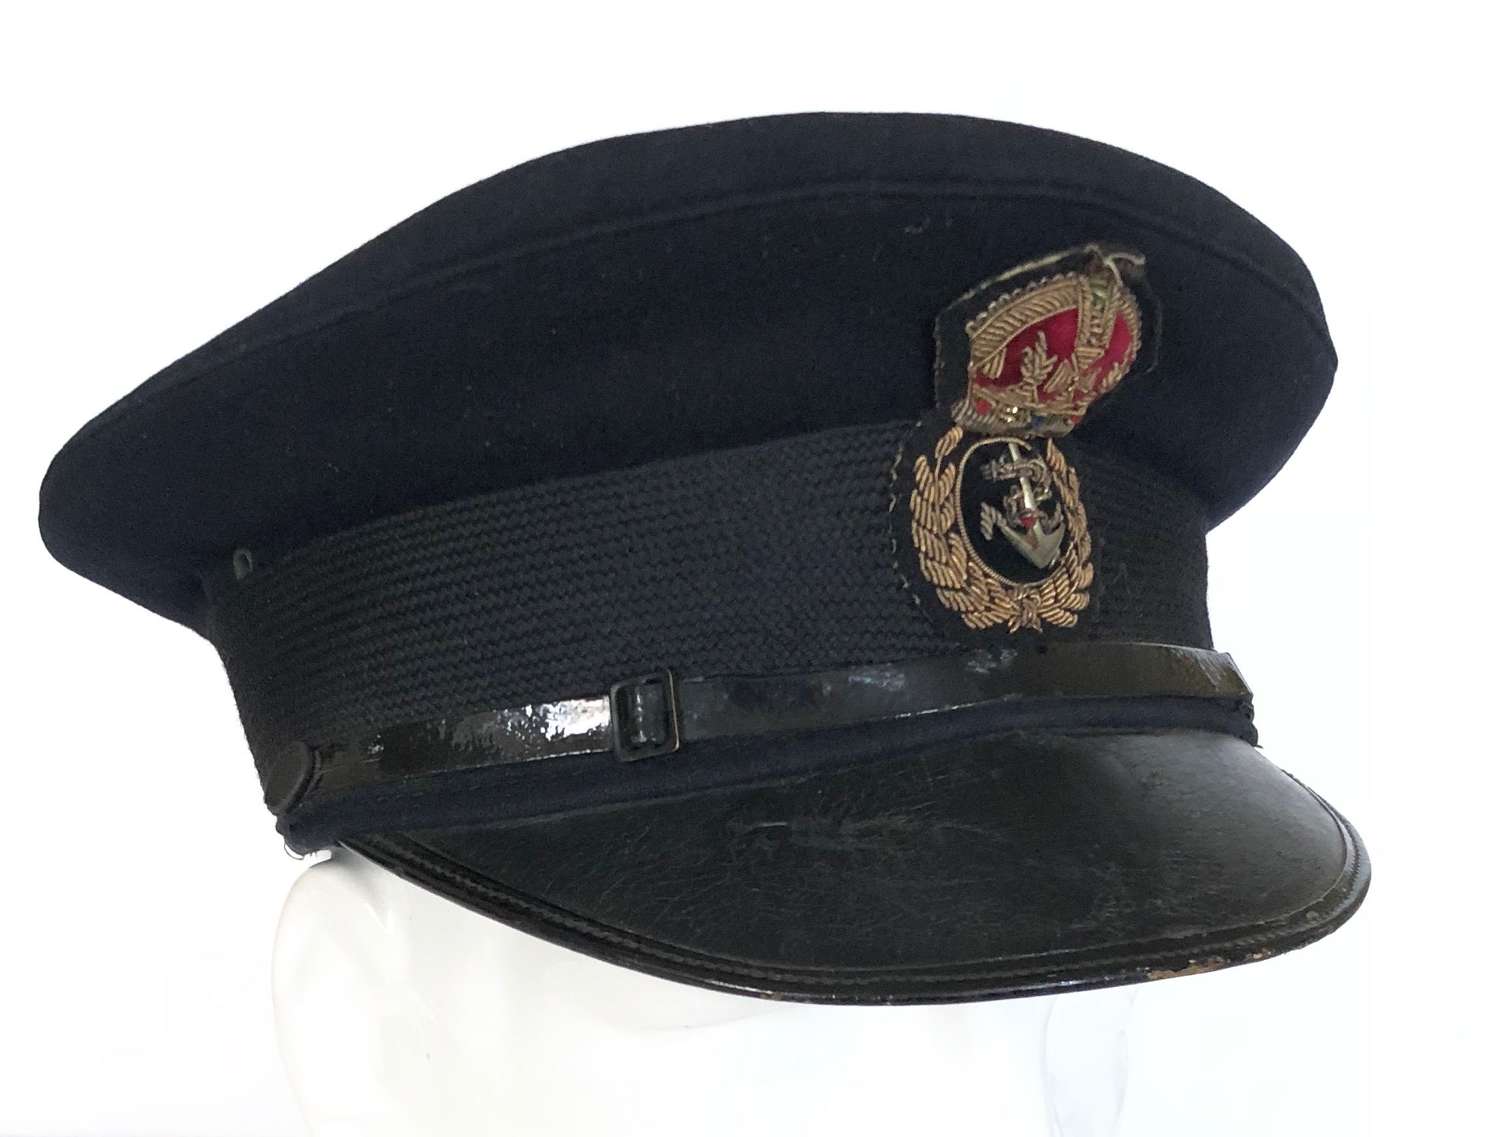 WW2 Period Royal Navy Chief Petty Officer Peaked Forage Cap.